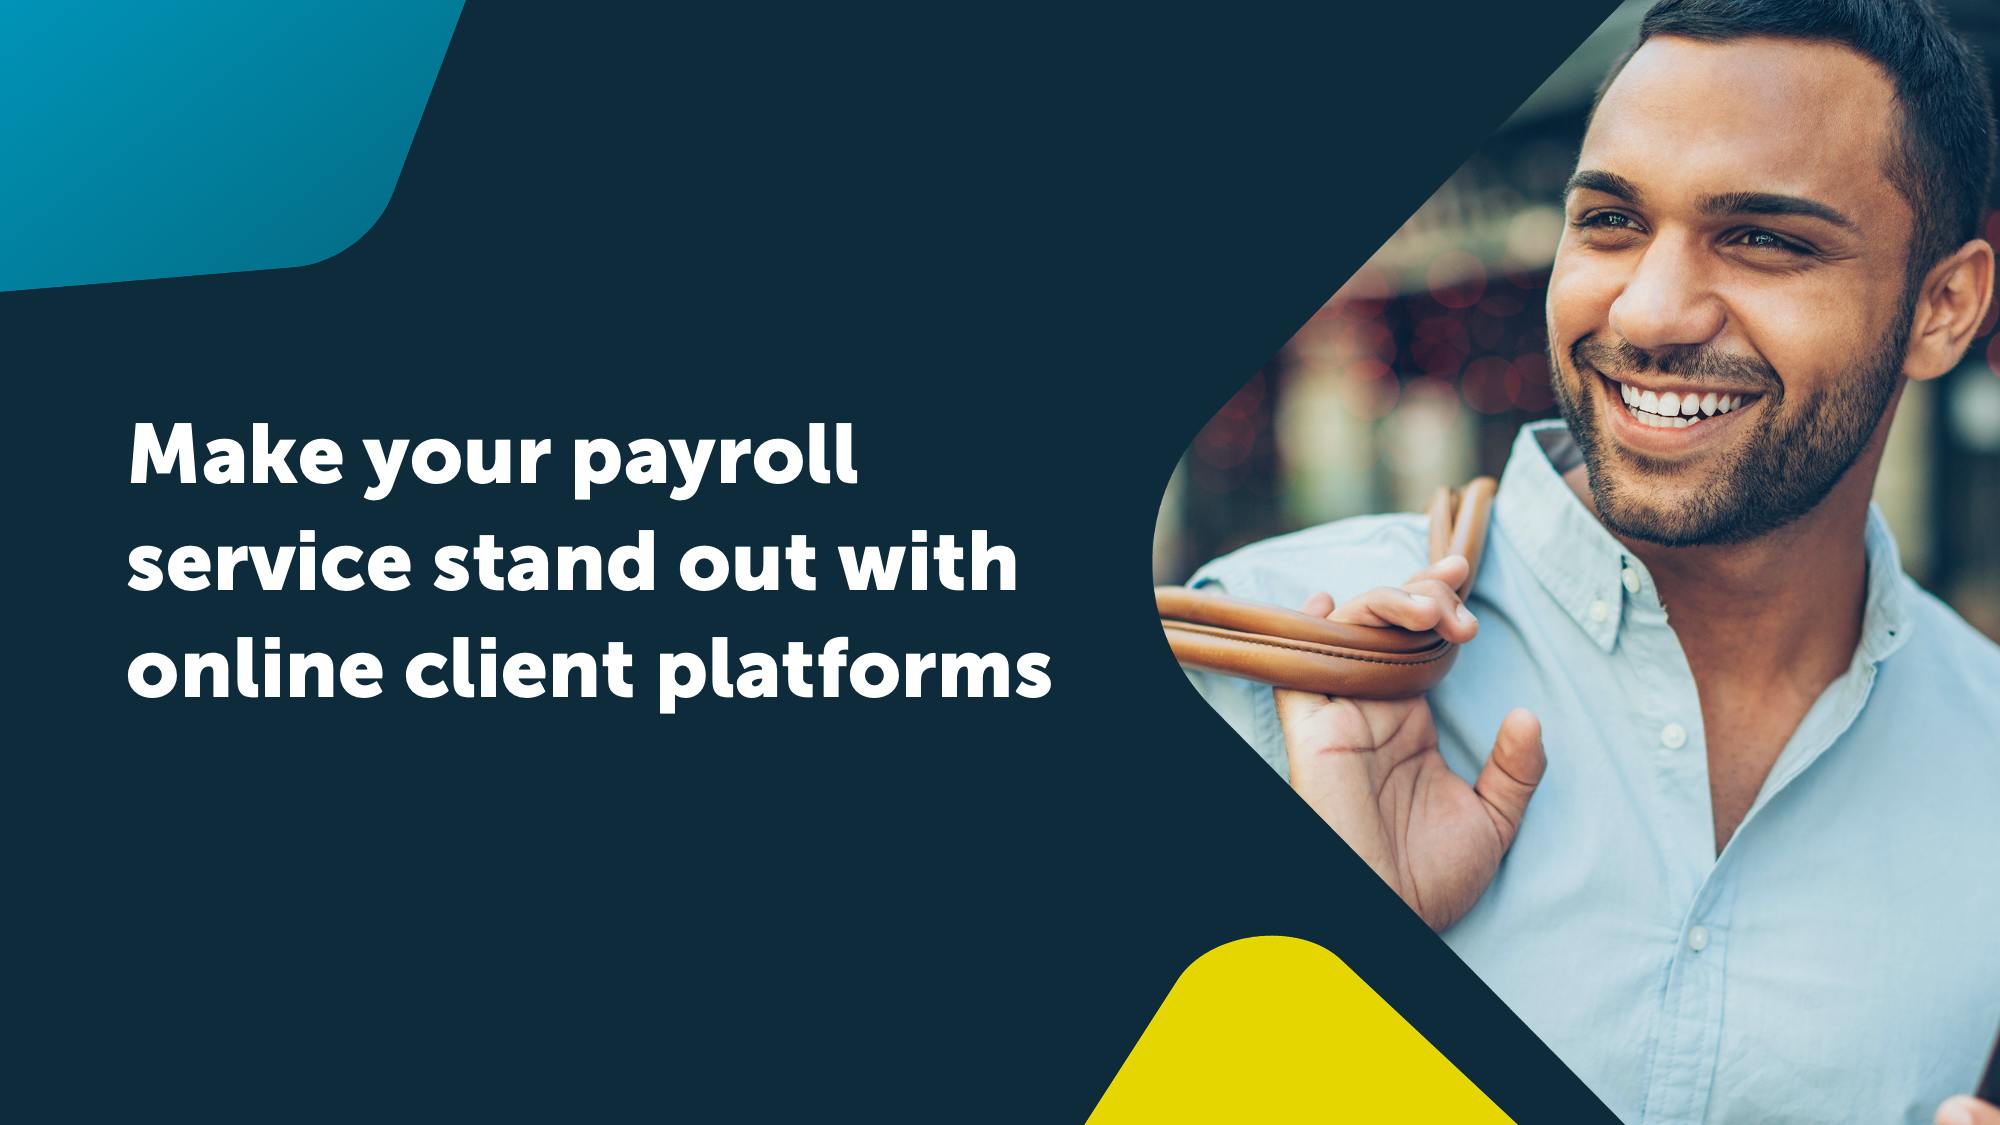 Make your payroll bureau service stand out with online client platforms